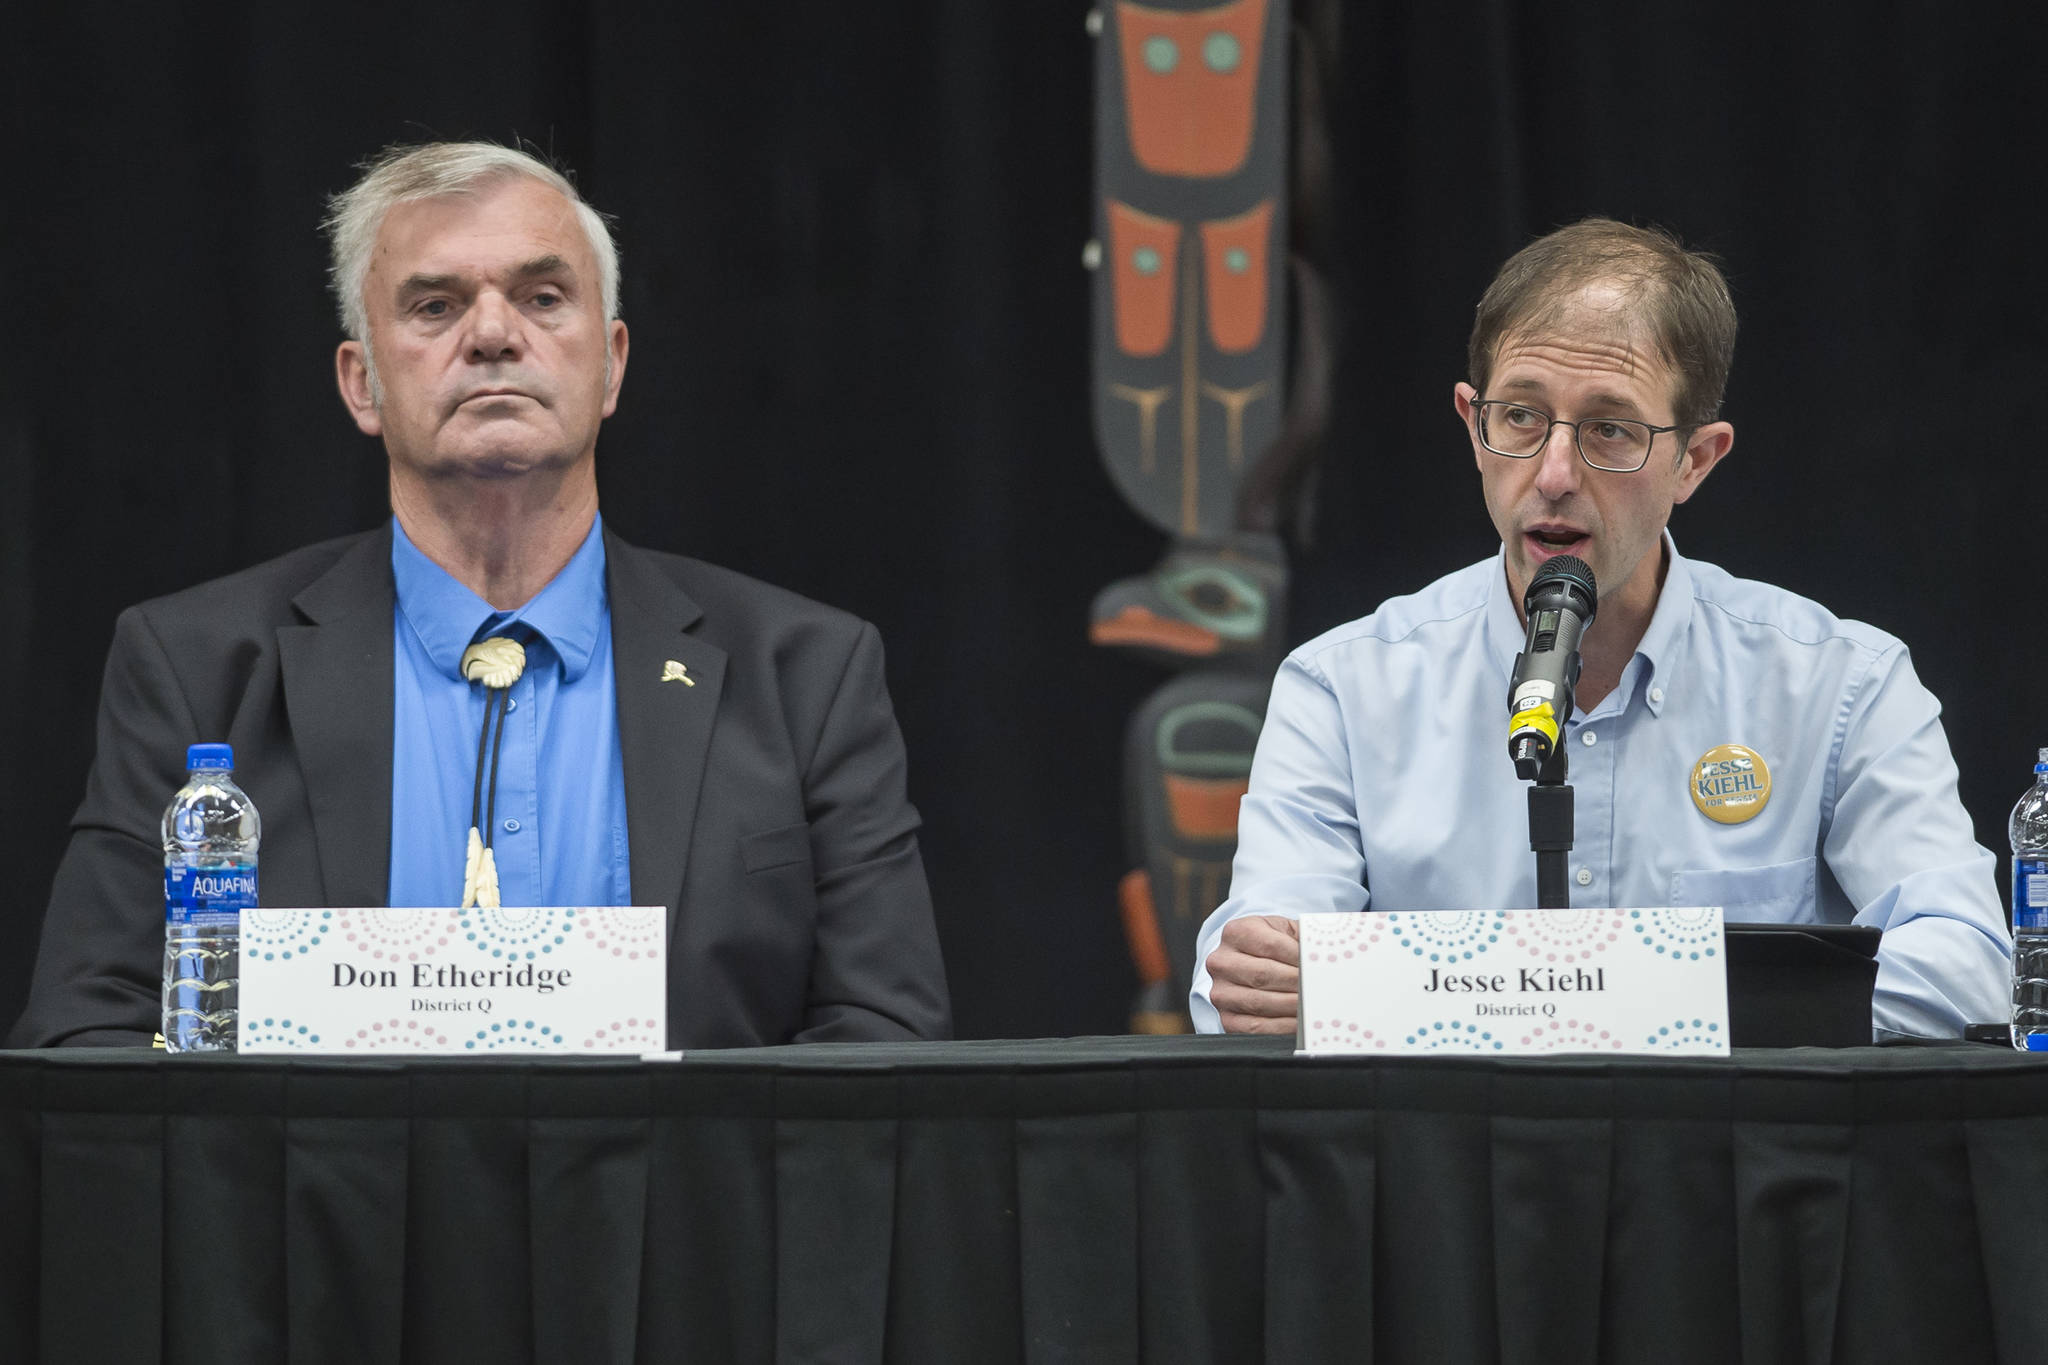 Senate District Q candidates Don Etheridge, left, and Jesse Kiehl answers questions during the Native Issues Forum at the Elizabeth Peratrovich Hall on Tuesday, Sept. 25, 2018. (Michael Penn | Juneau Empire)